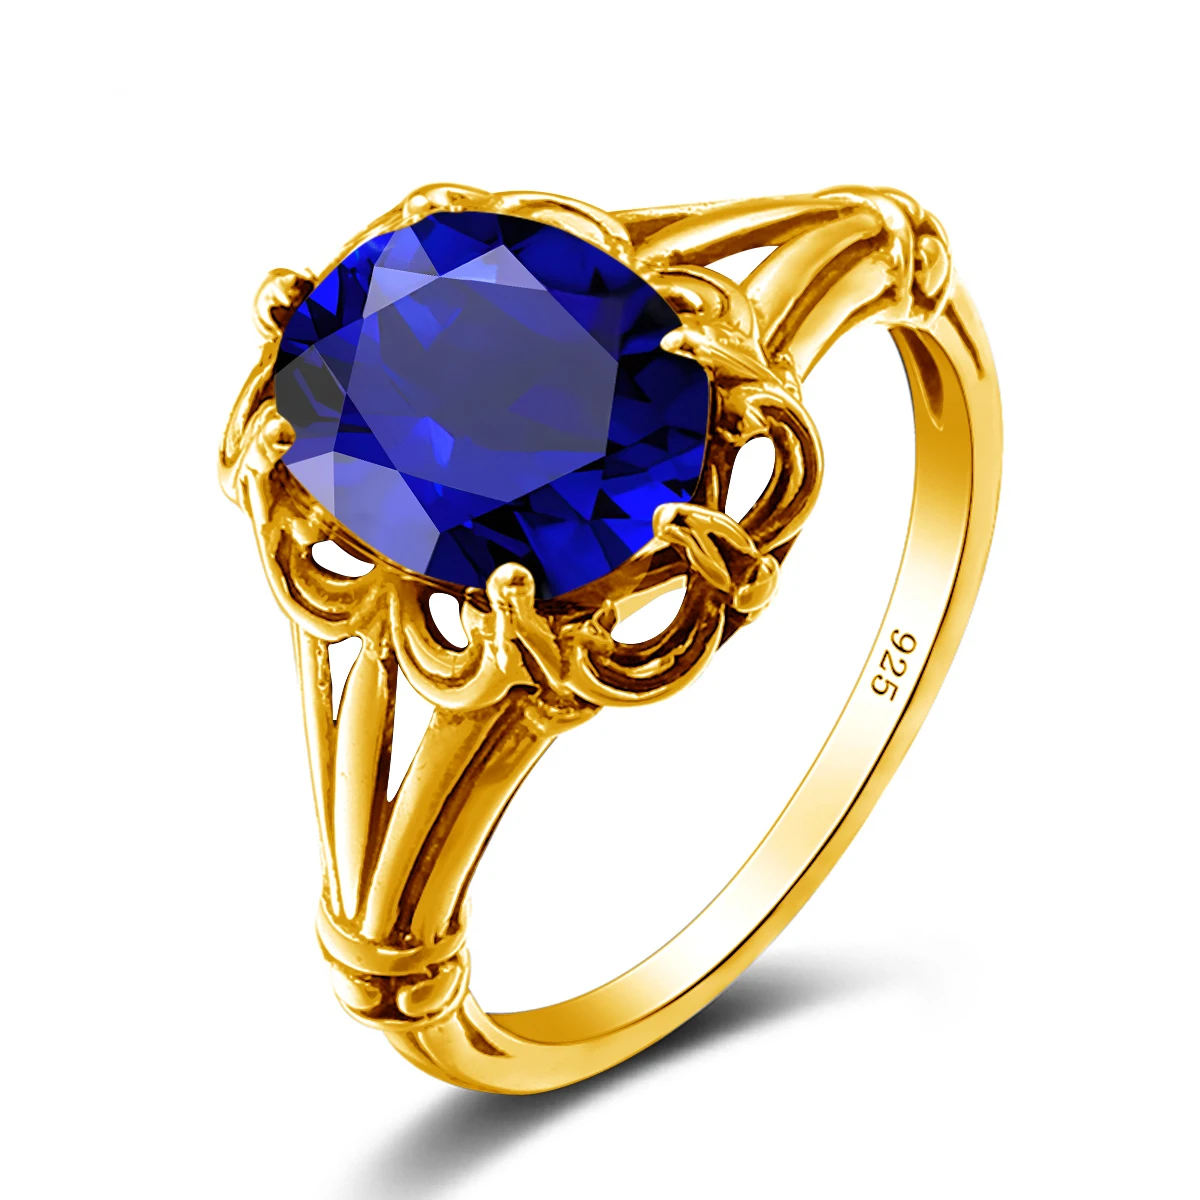 

Vintage Exquisite Filigree Cocktail Party Favor 925 Sterling Silver Plated 18K Gold Women's Sapphire Rings Jewelry